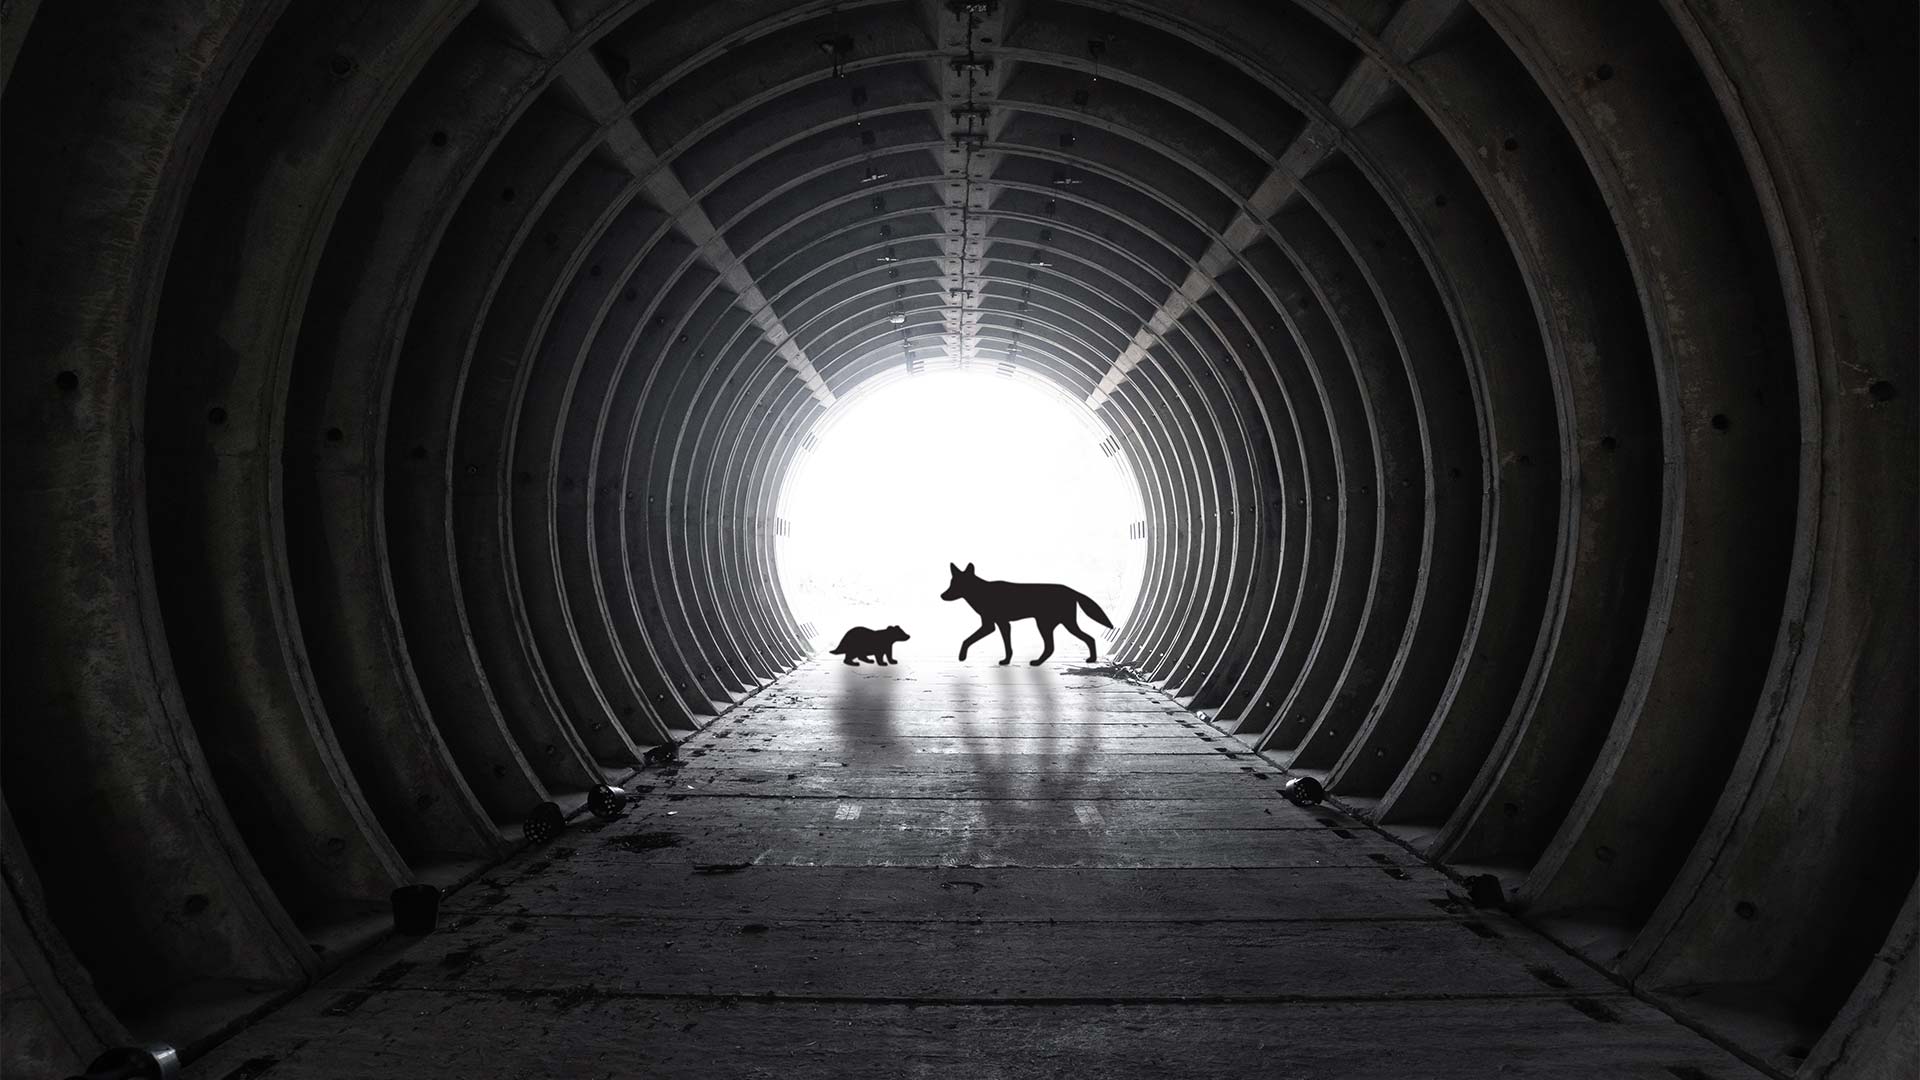 View from inside a tunnel with a coyote and badger at the entrance